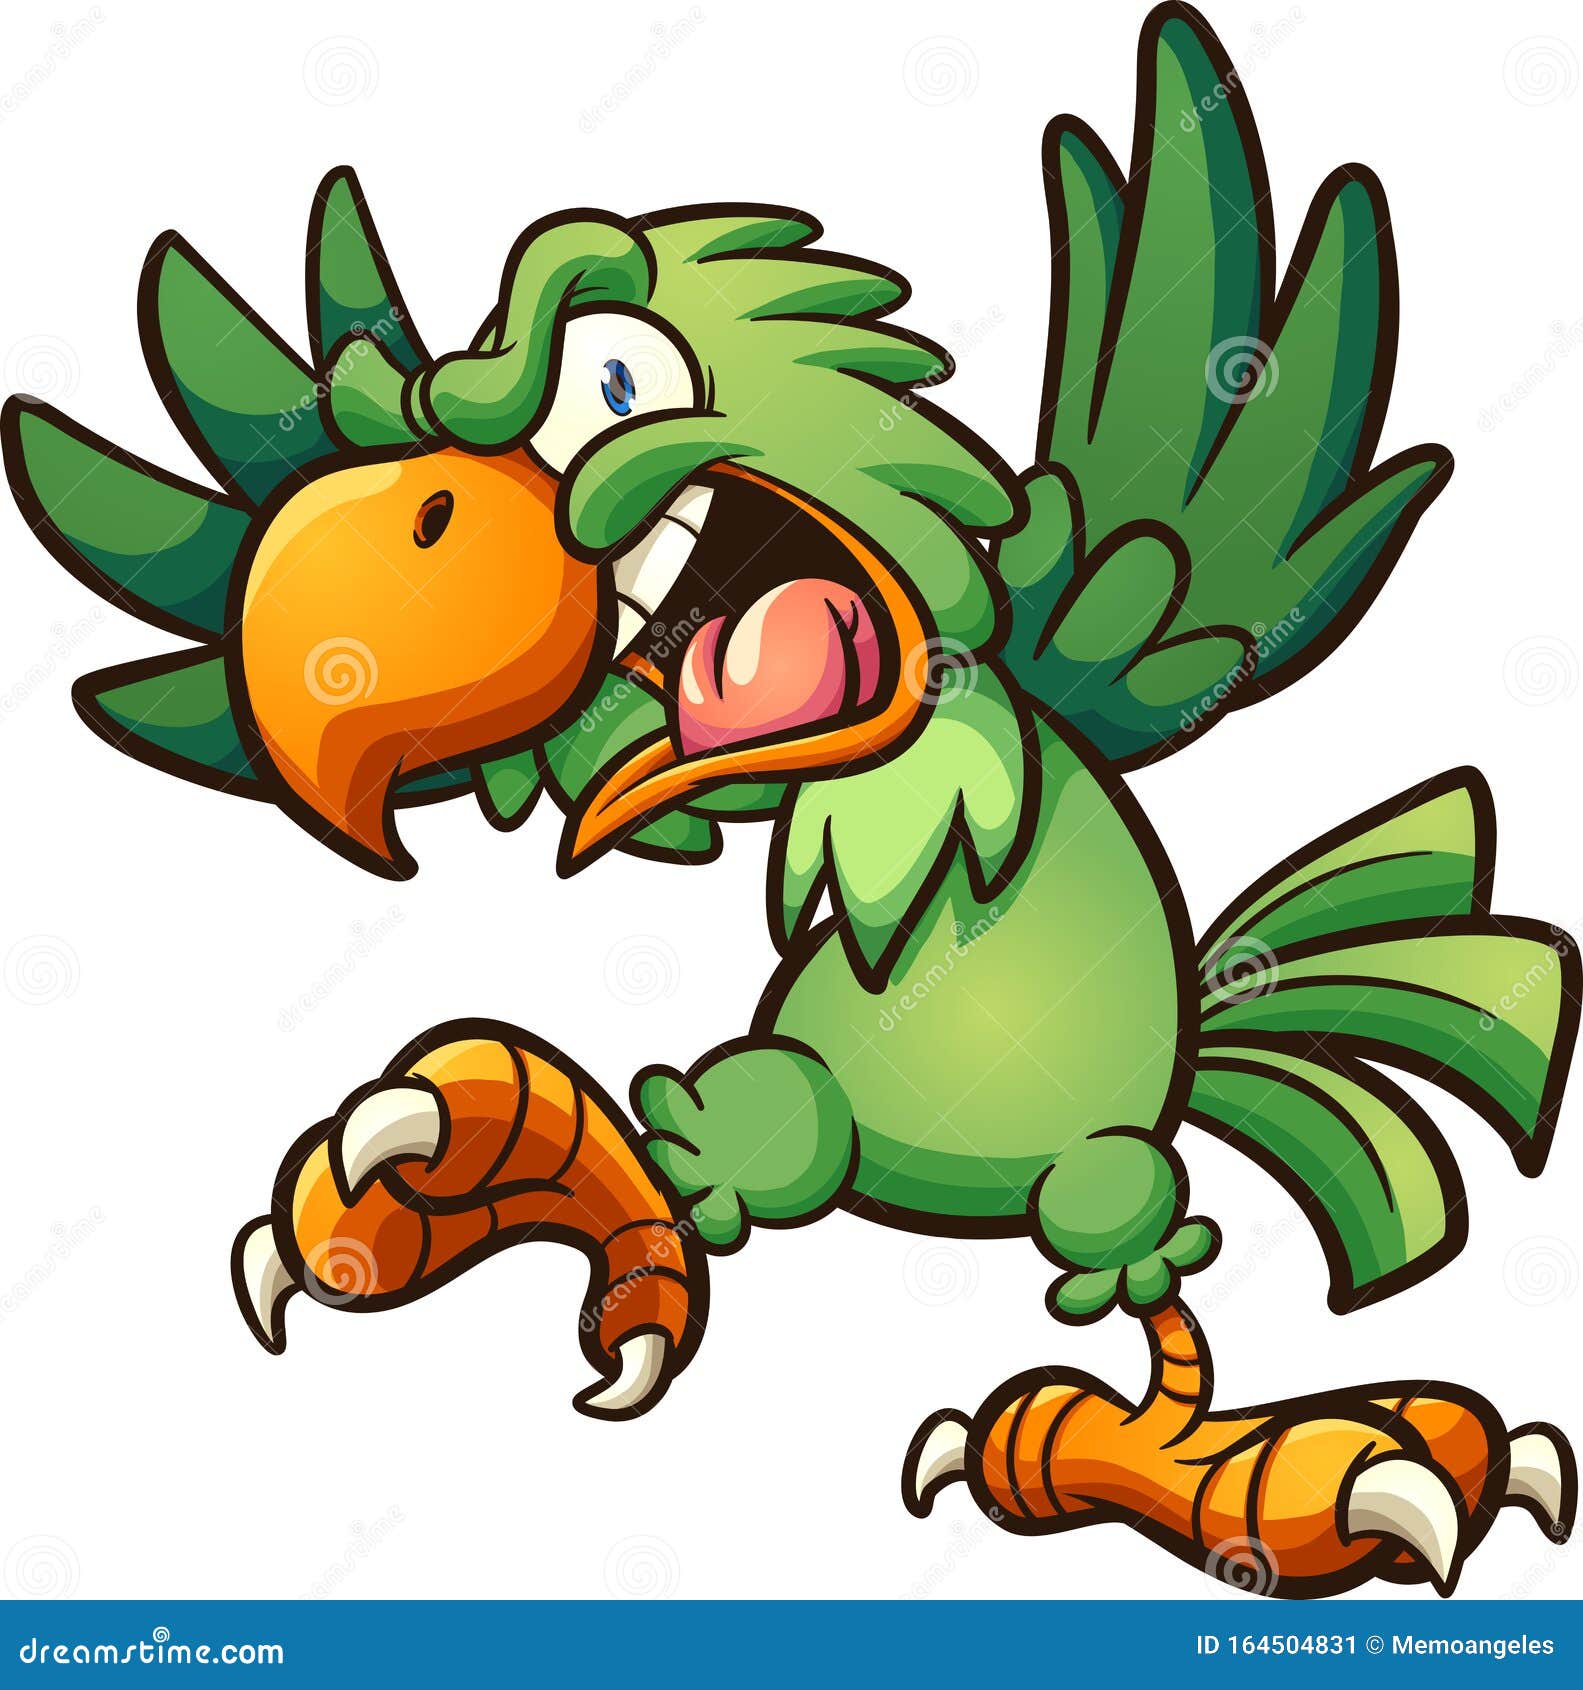 Angry Cartoon Parrot Stock Illustrations – 118 Angry Cartoon Parrot Stock  Illustrations, Vectors & Clipart - Dreamstime